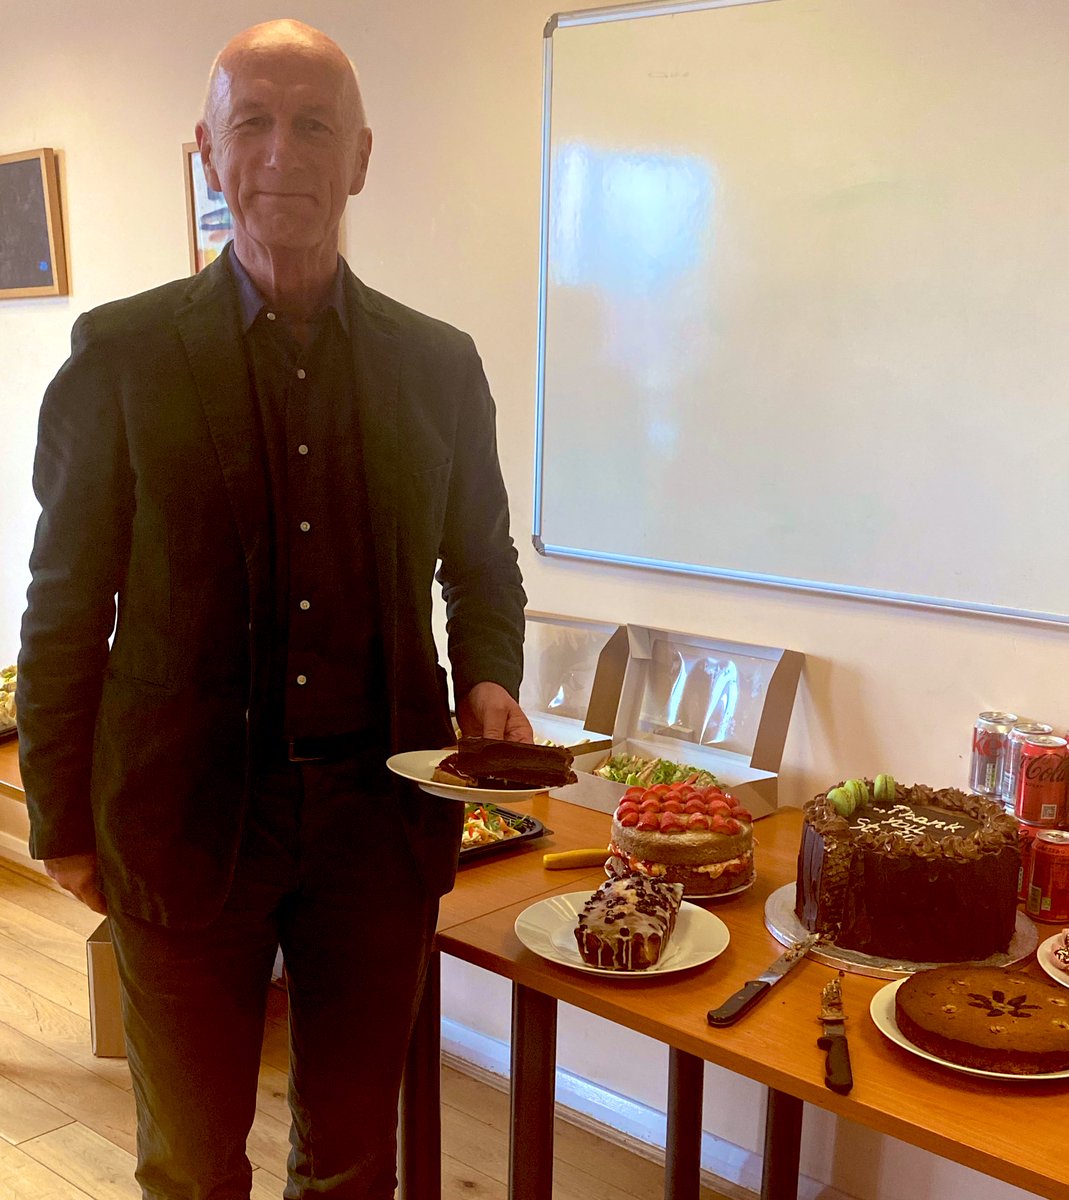 Today we say a fond farewell to Prof Stefan Priebe on his last day in the Newham office after 25 years of working with @NHS_ELFT & @QMULPsychiatry. This Unit would not exist without him and he leaves behind a great legacy. Wishing him a very happy retirement!